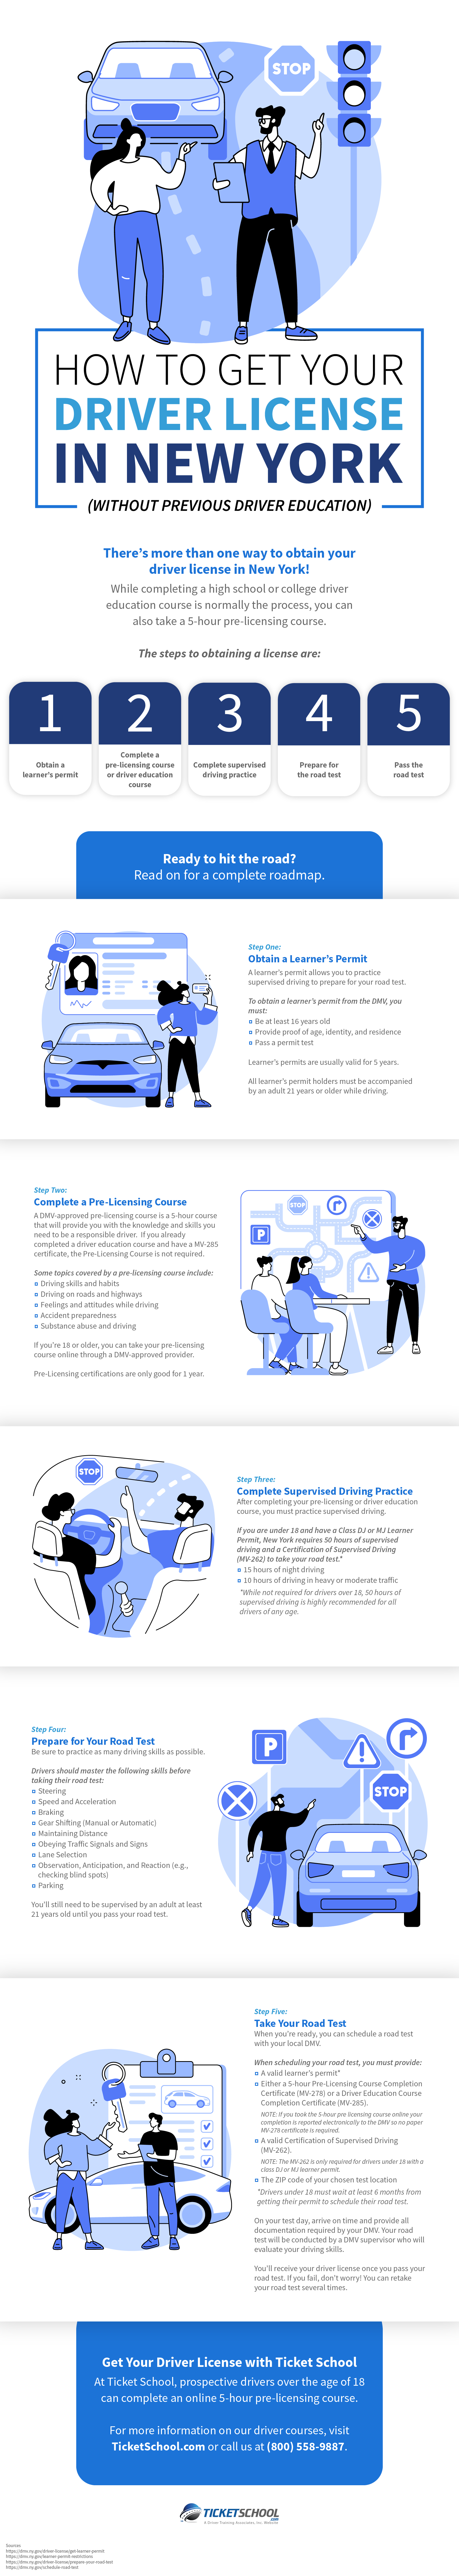 How to Get Your Driver License in New York Infographic